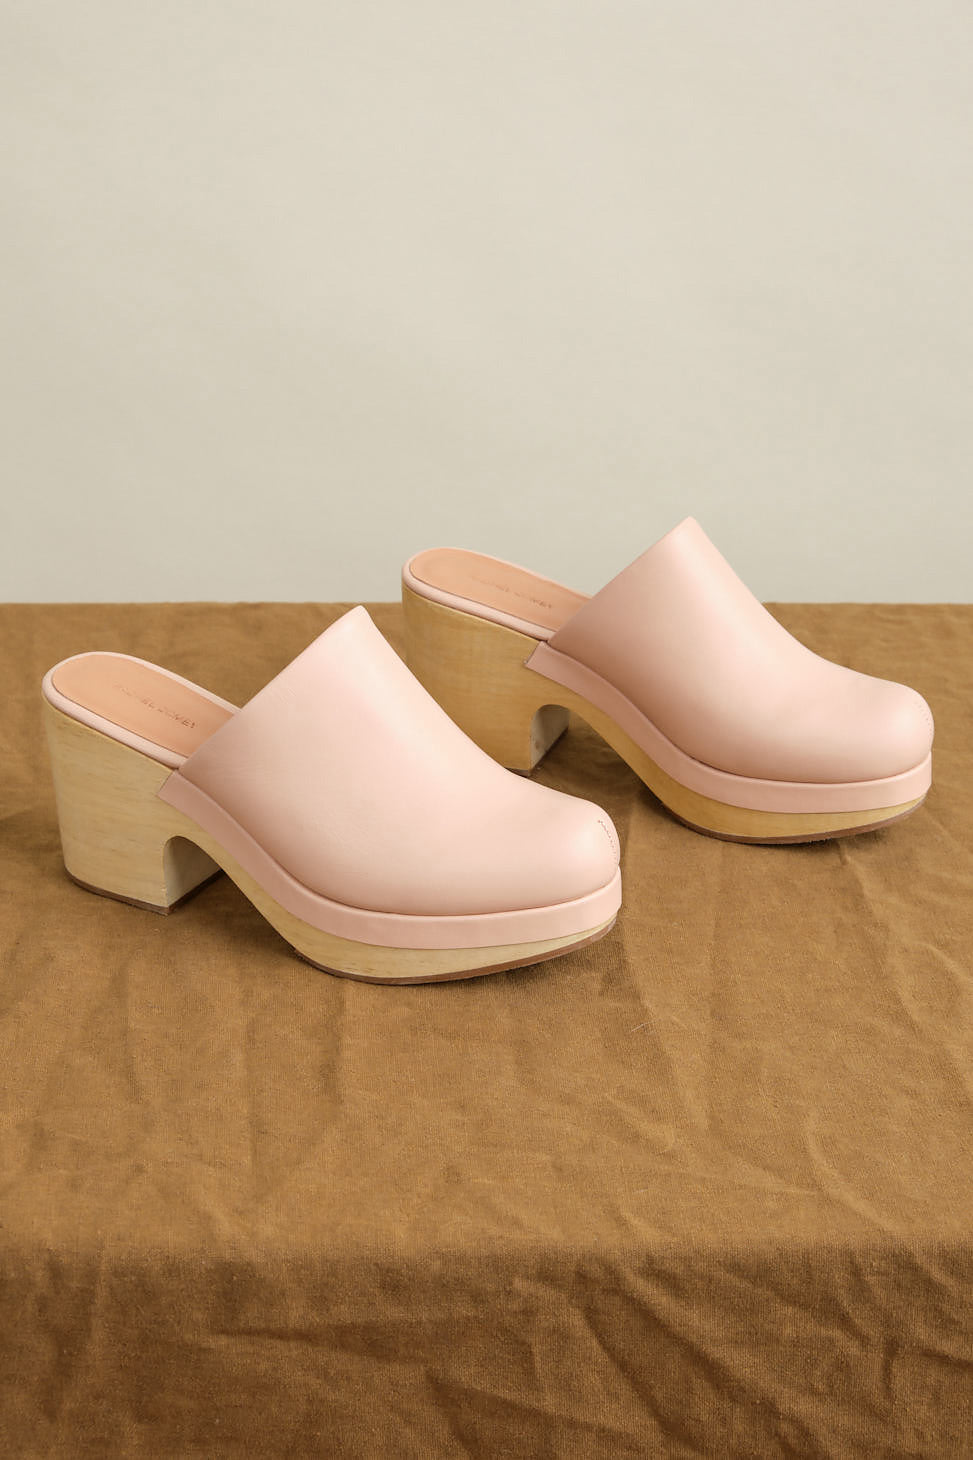 Bose Clog in Blush on table